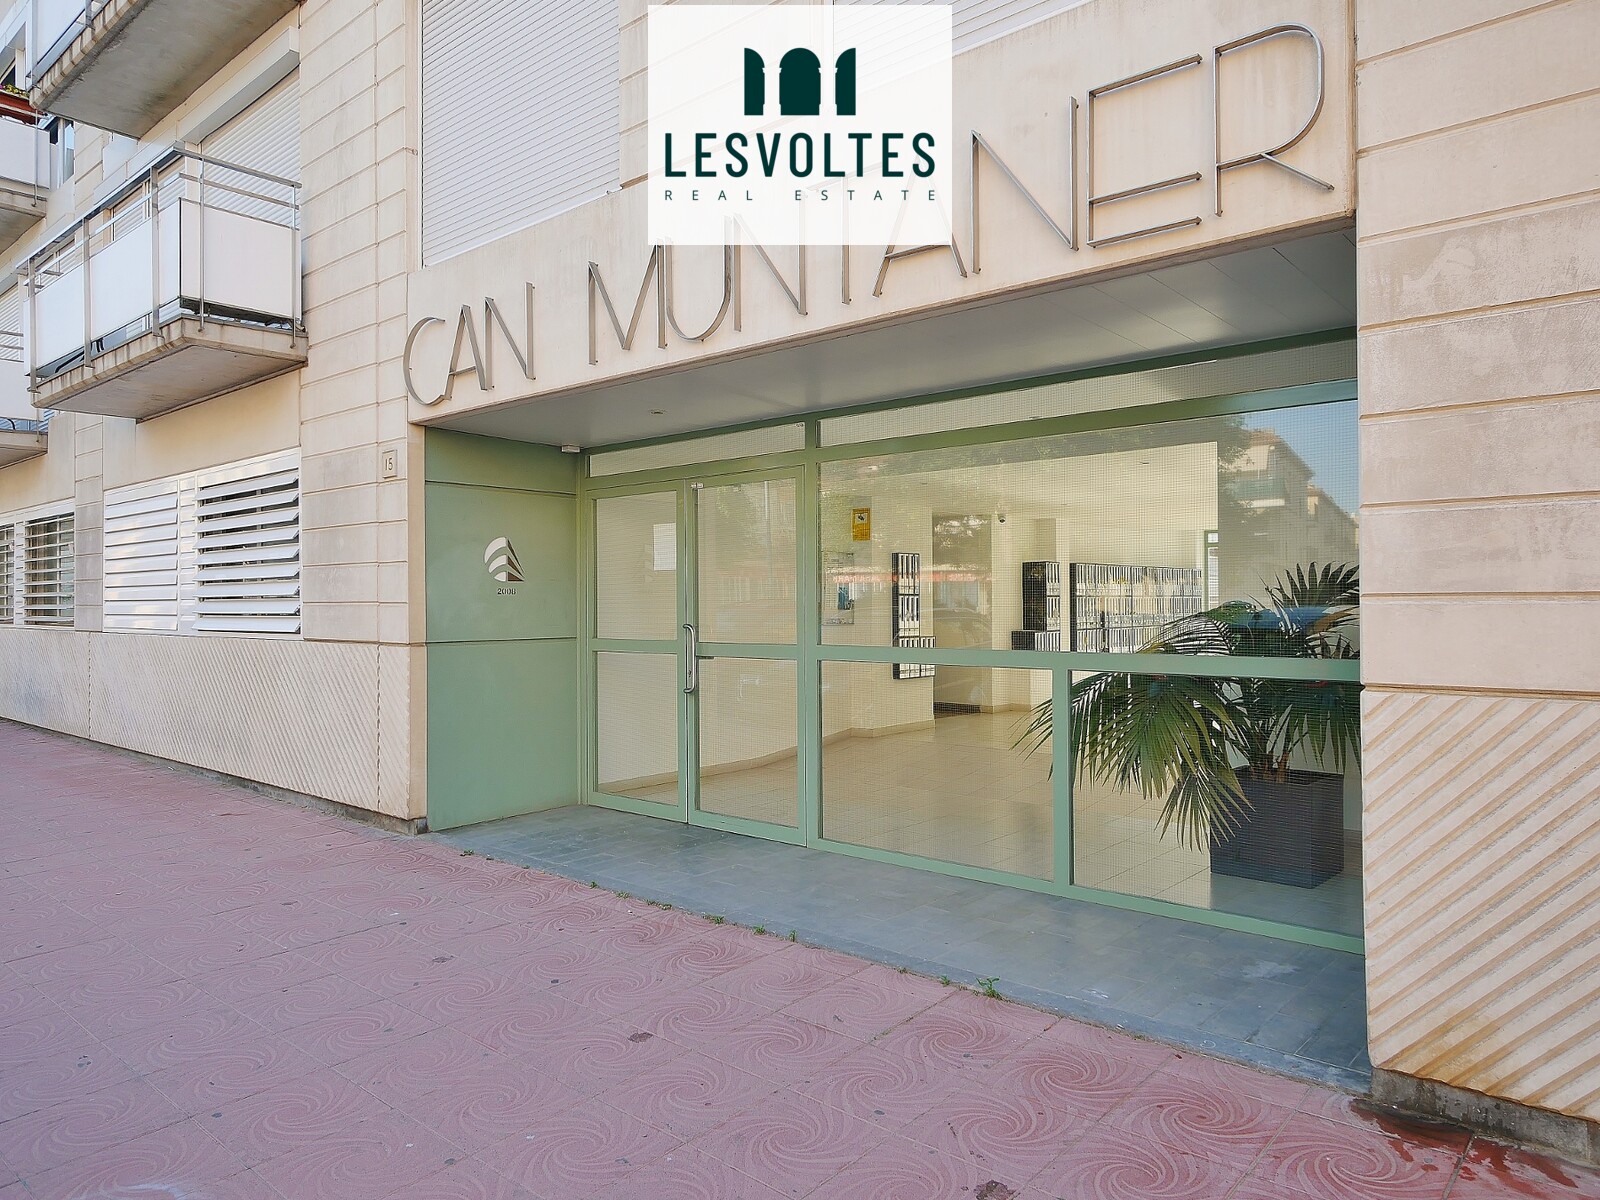 FLAT OF 41SQ M IN CENTRAL AREA OF PALAMÓS AND 300 M FROM THE BEACH.